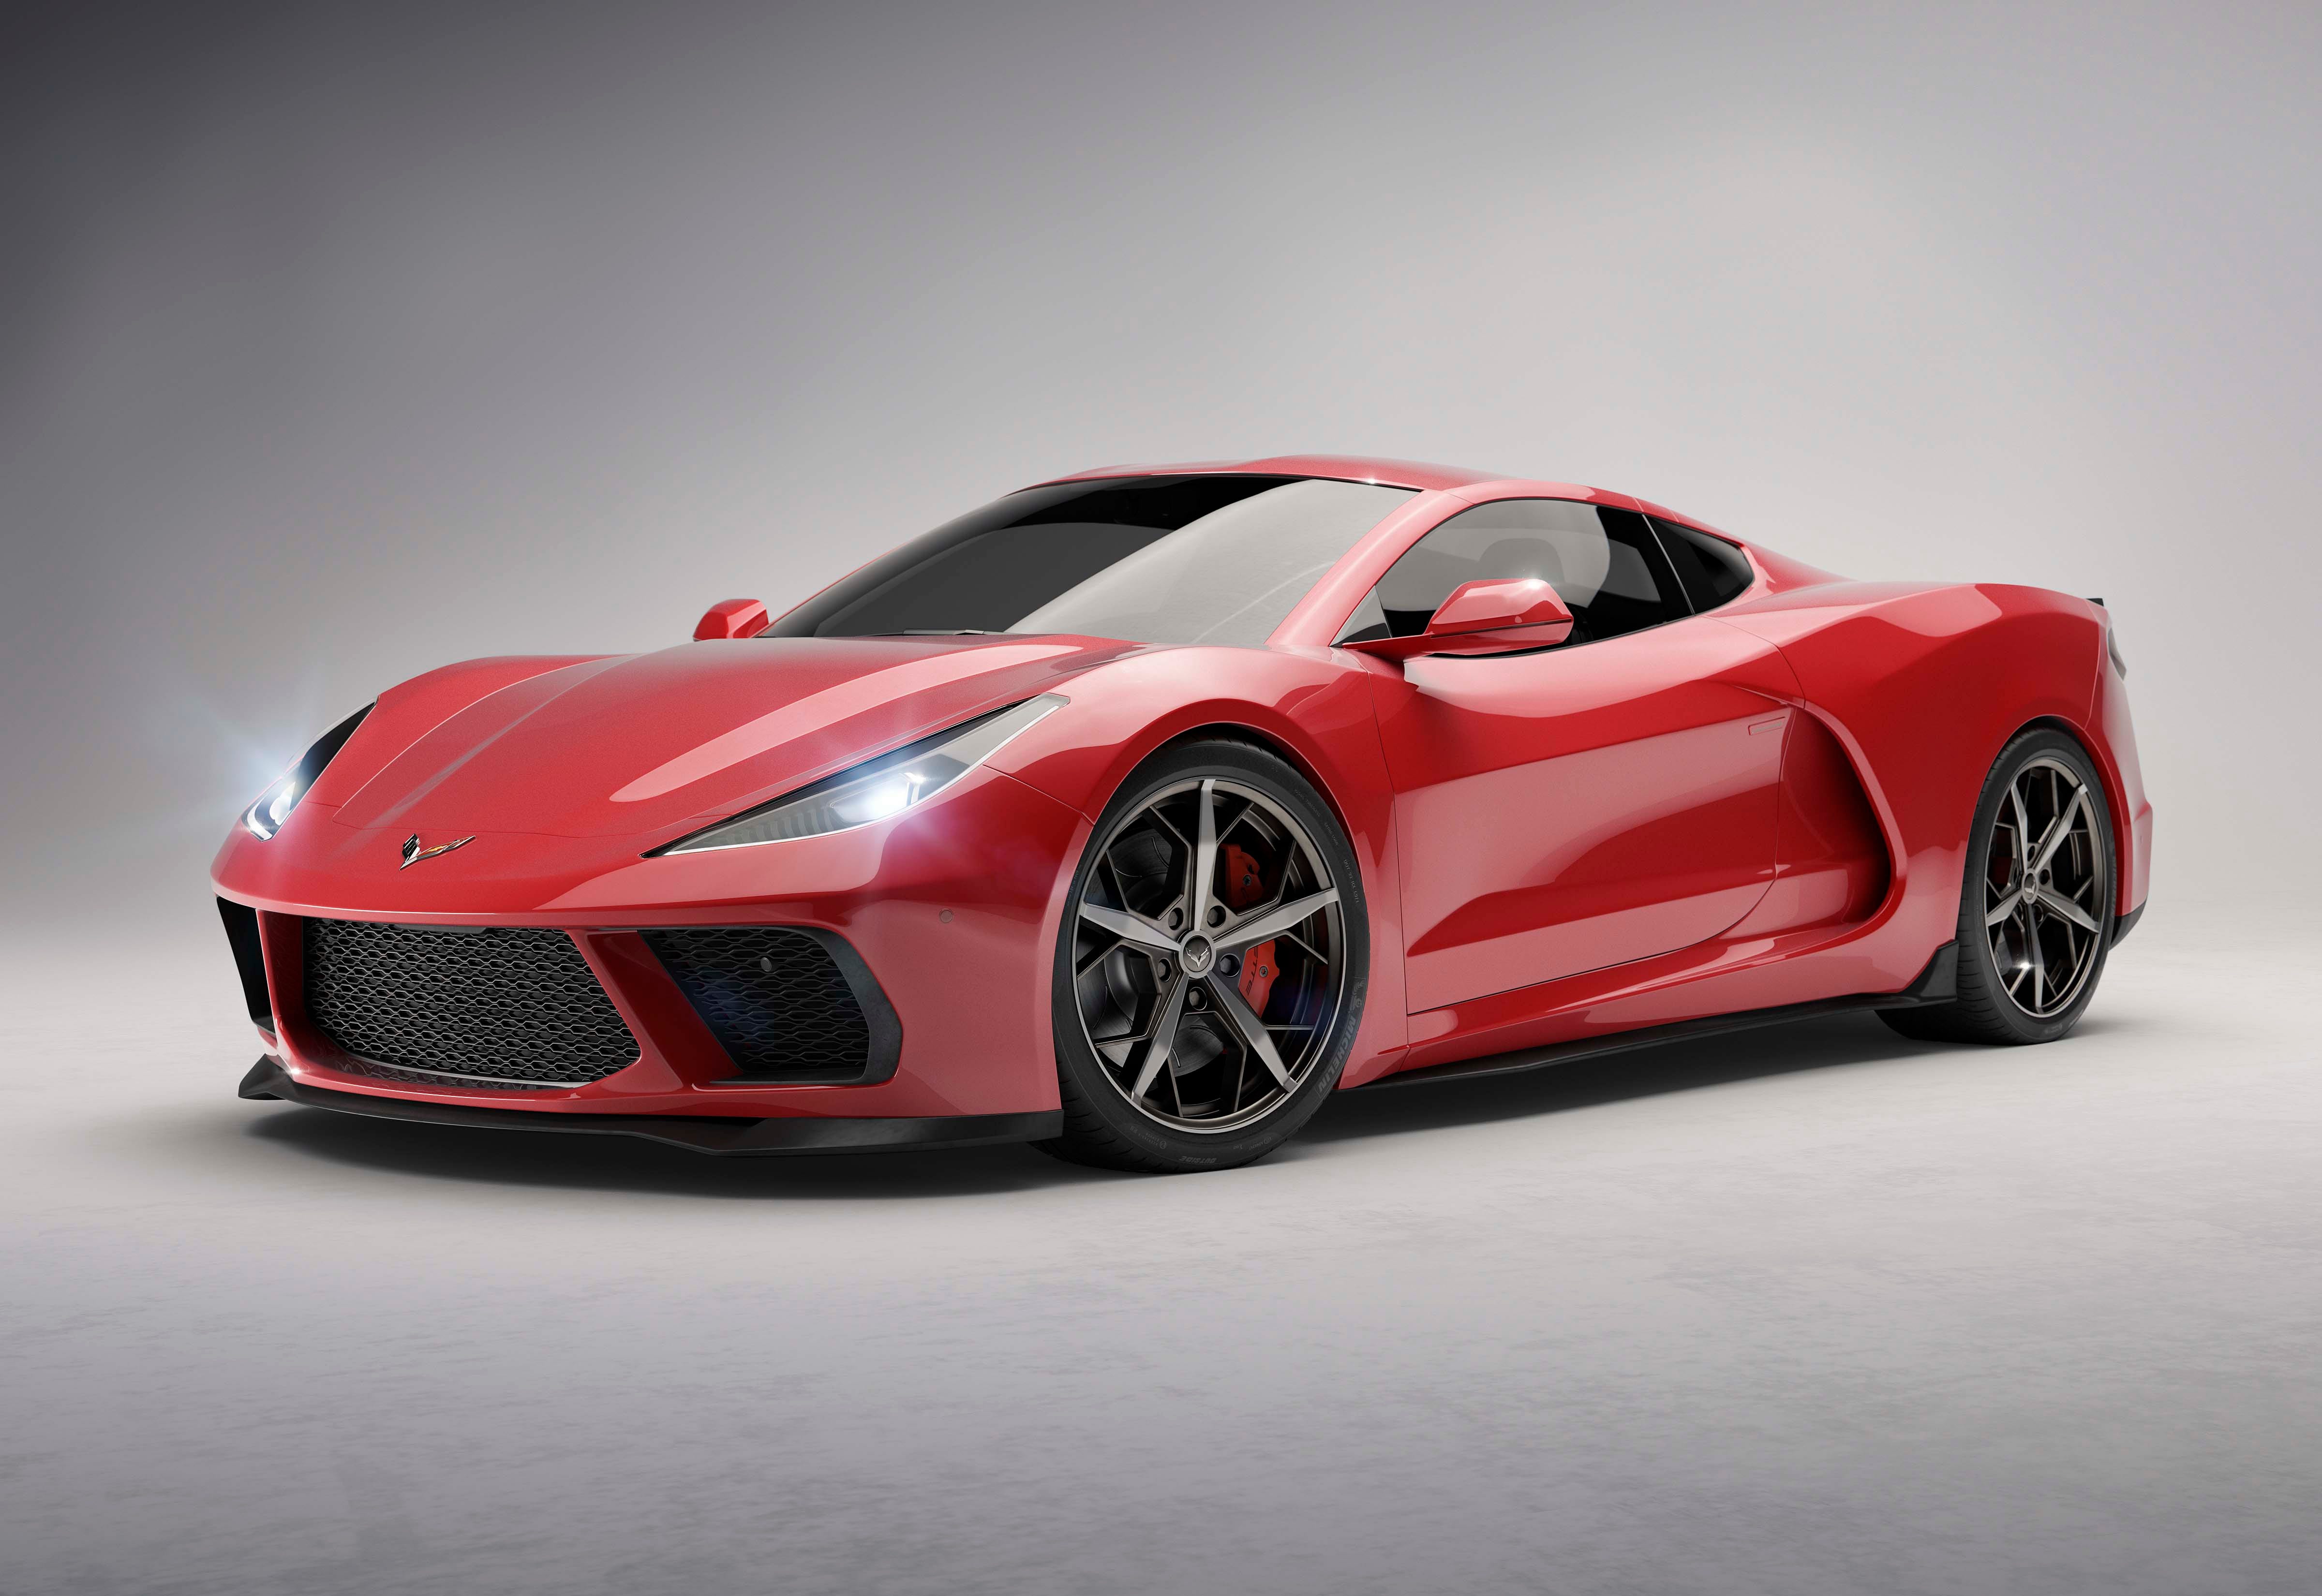 A Car and Driver rendering of the 2020 Corvette C8 - the first mid-engine version of the storied Chevy sports car.